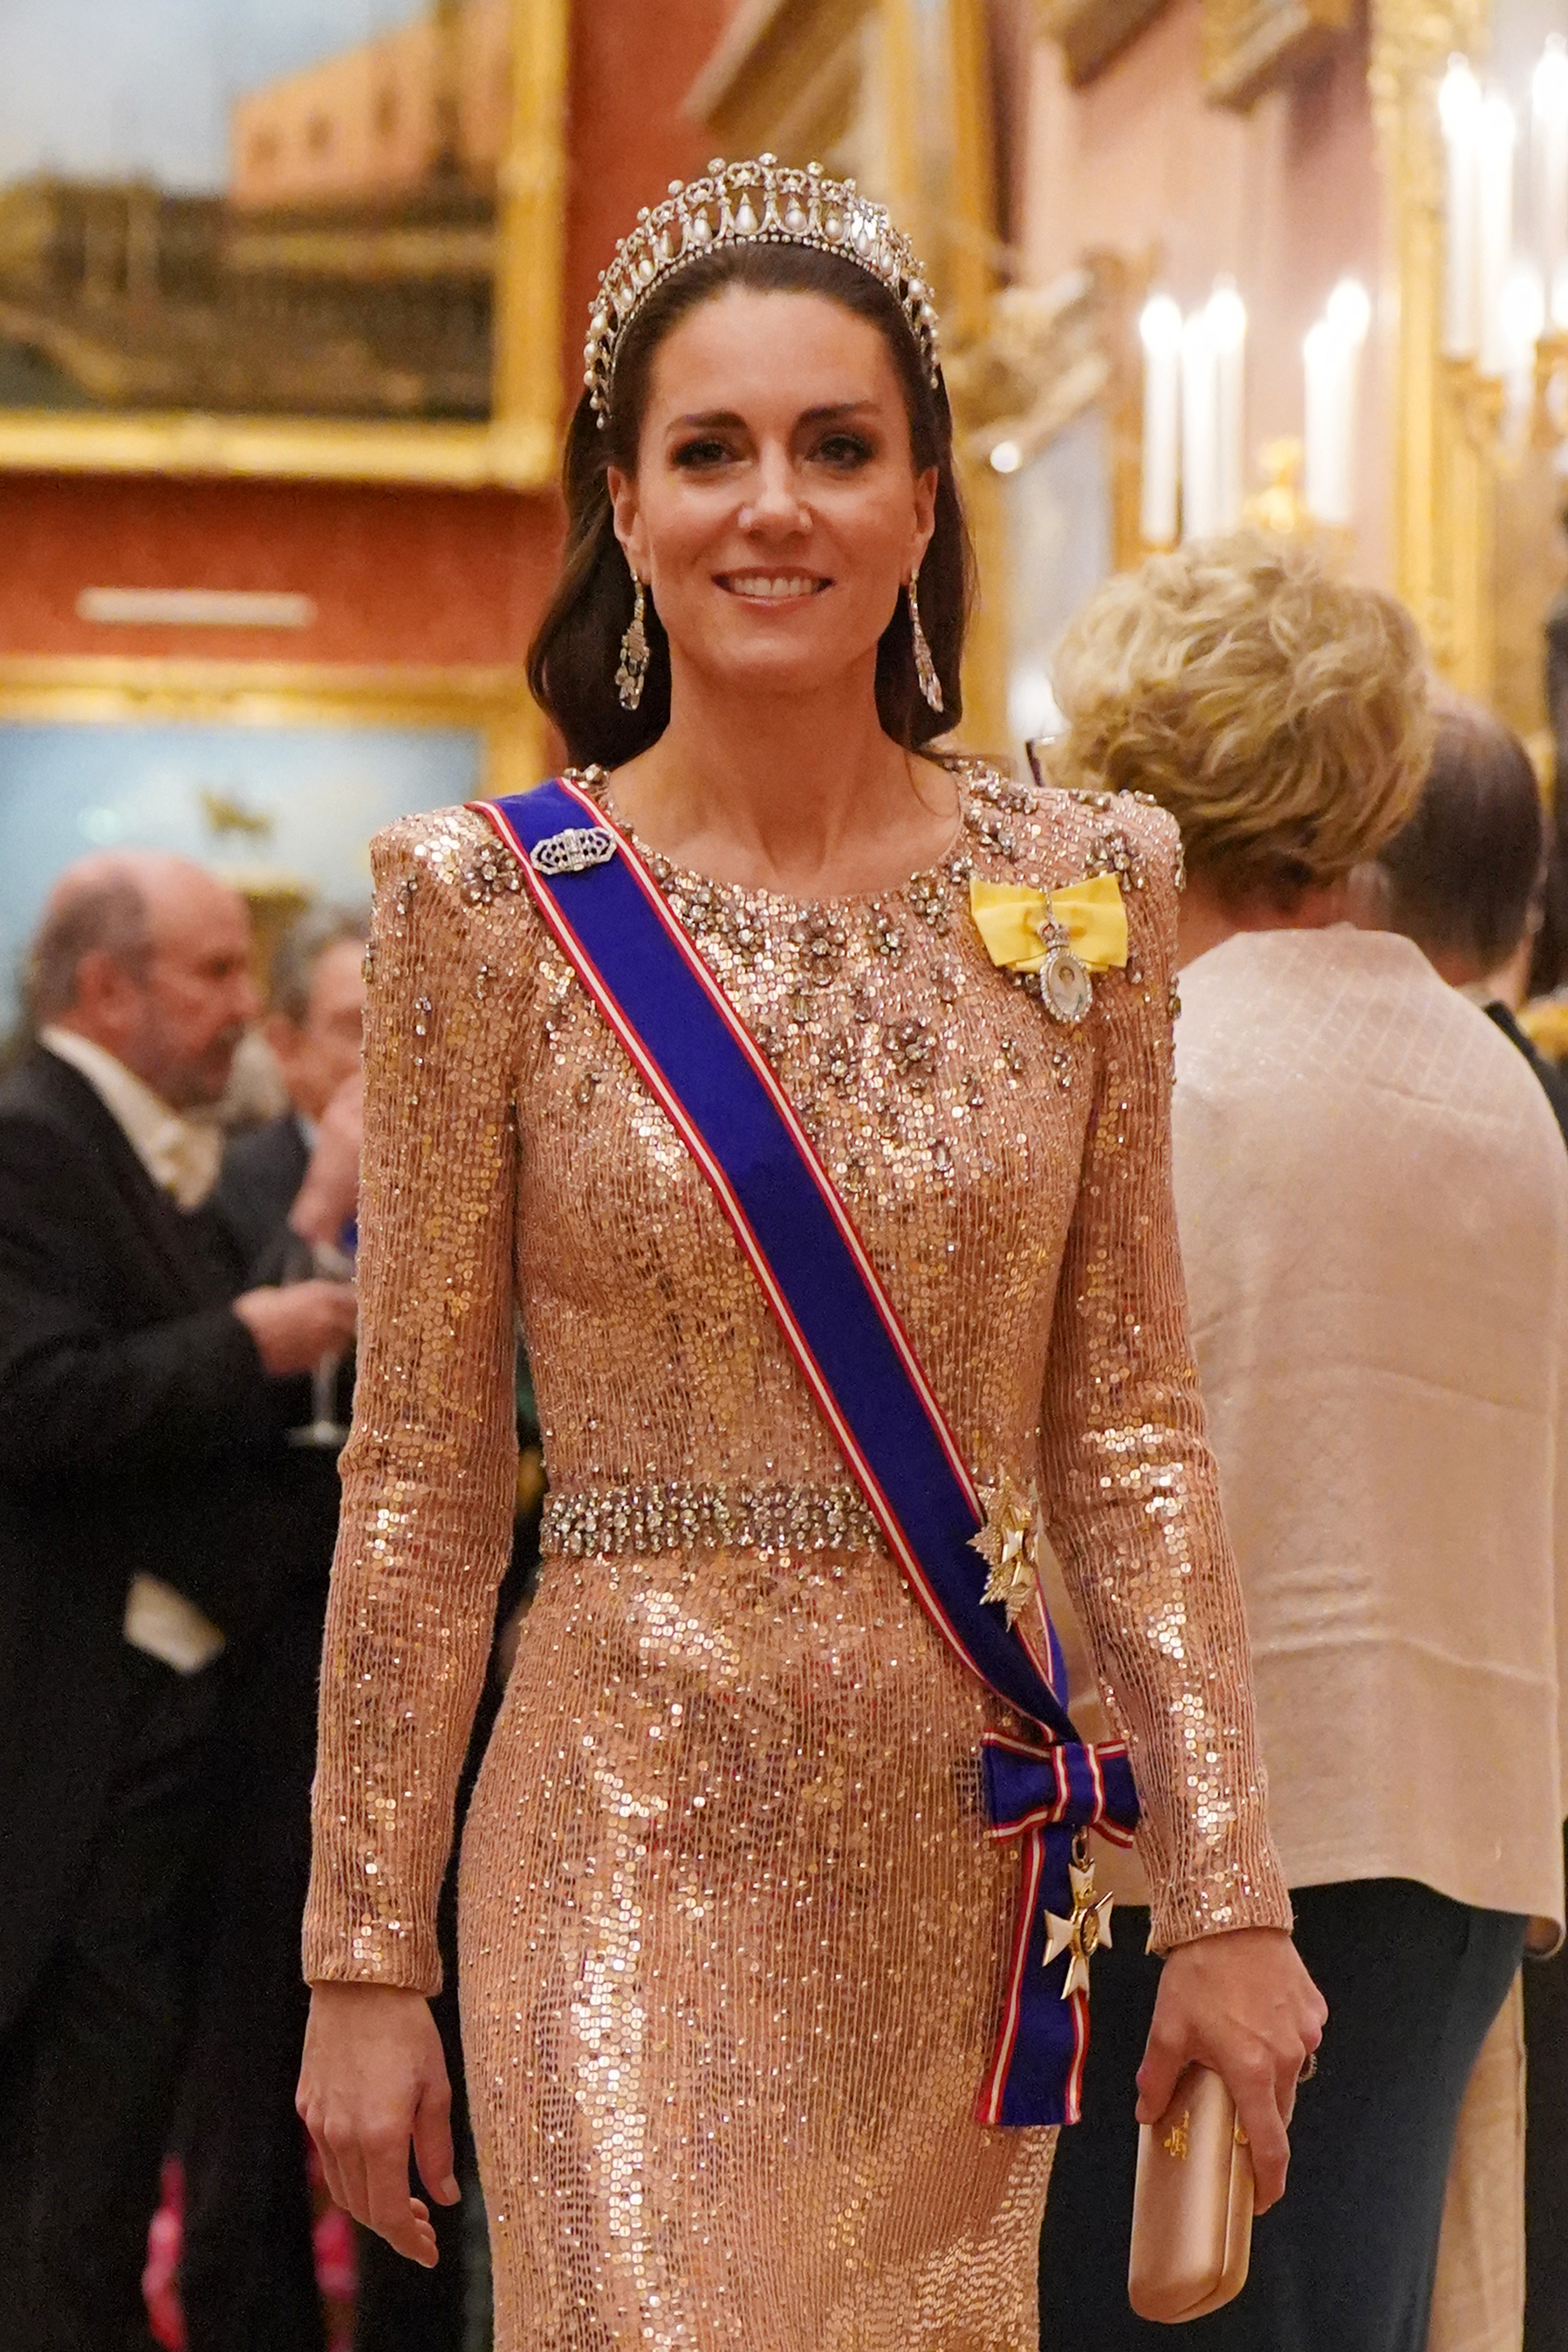 Kate Middleton in a glittery gown with a sash and tiara at a formal event